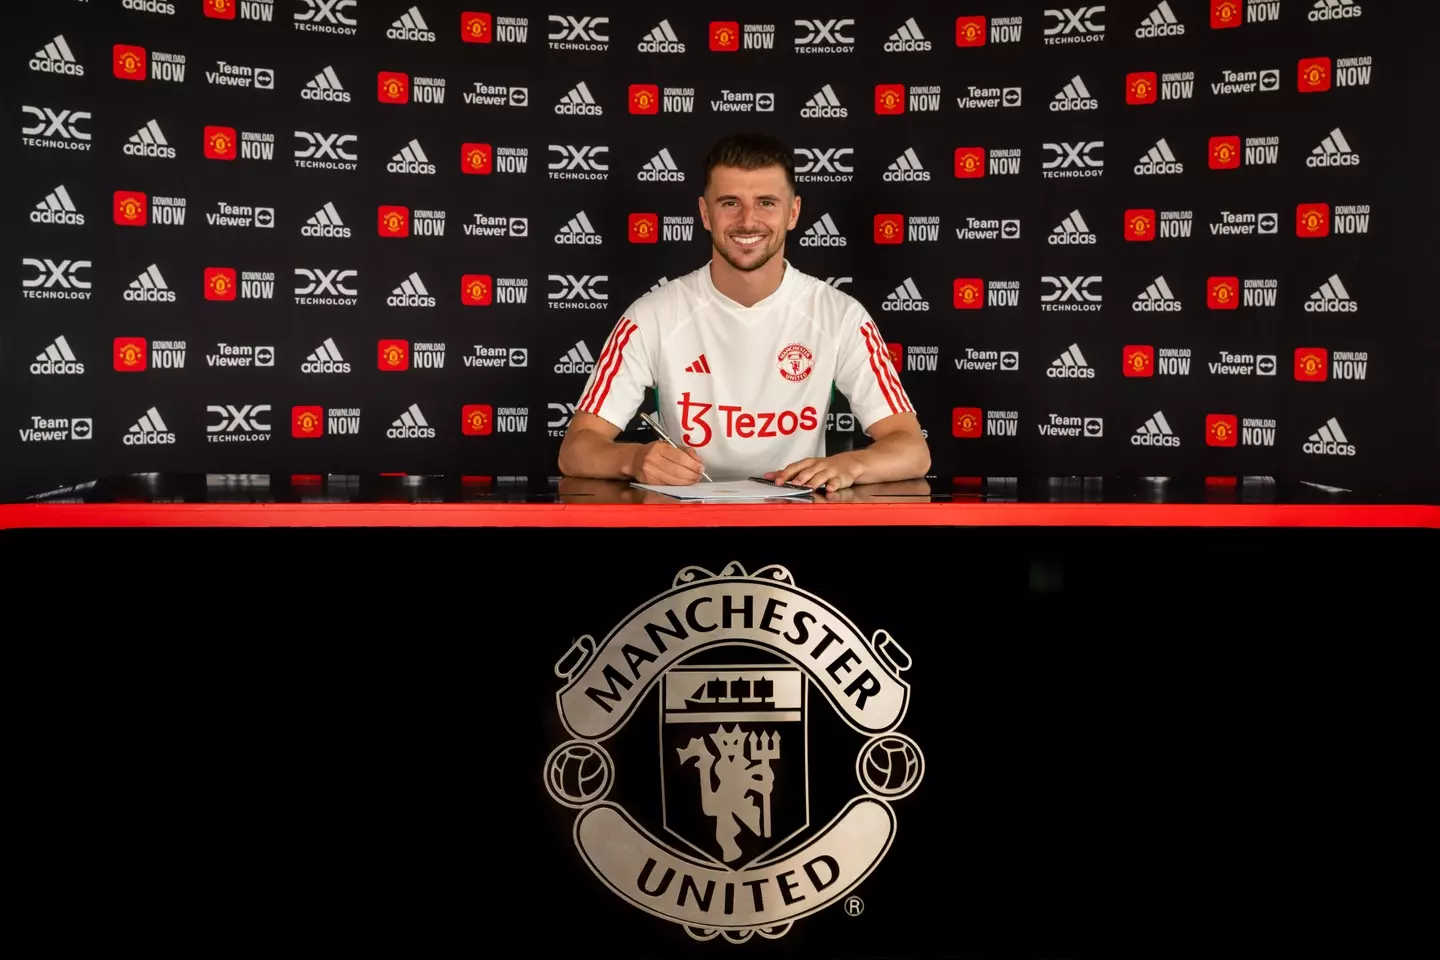 Mason Mount signs his Manchester United contract. Image: Getty